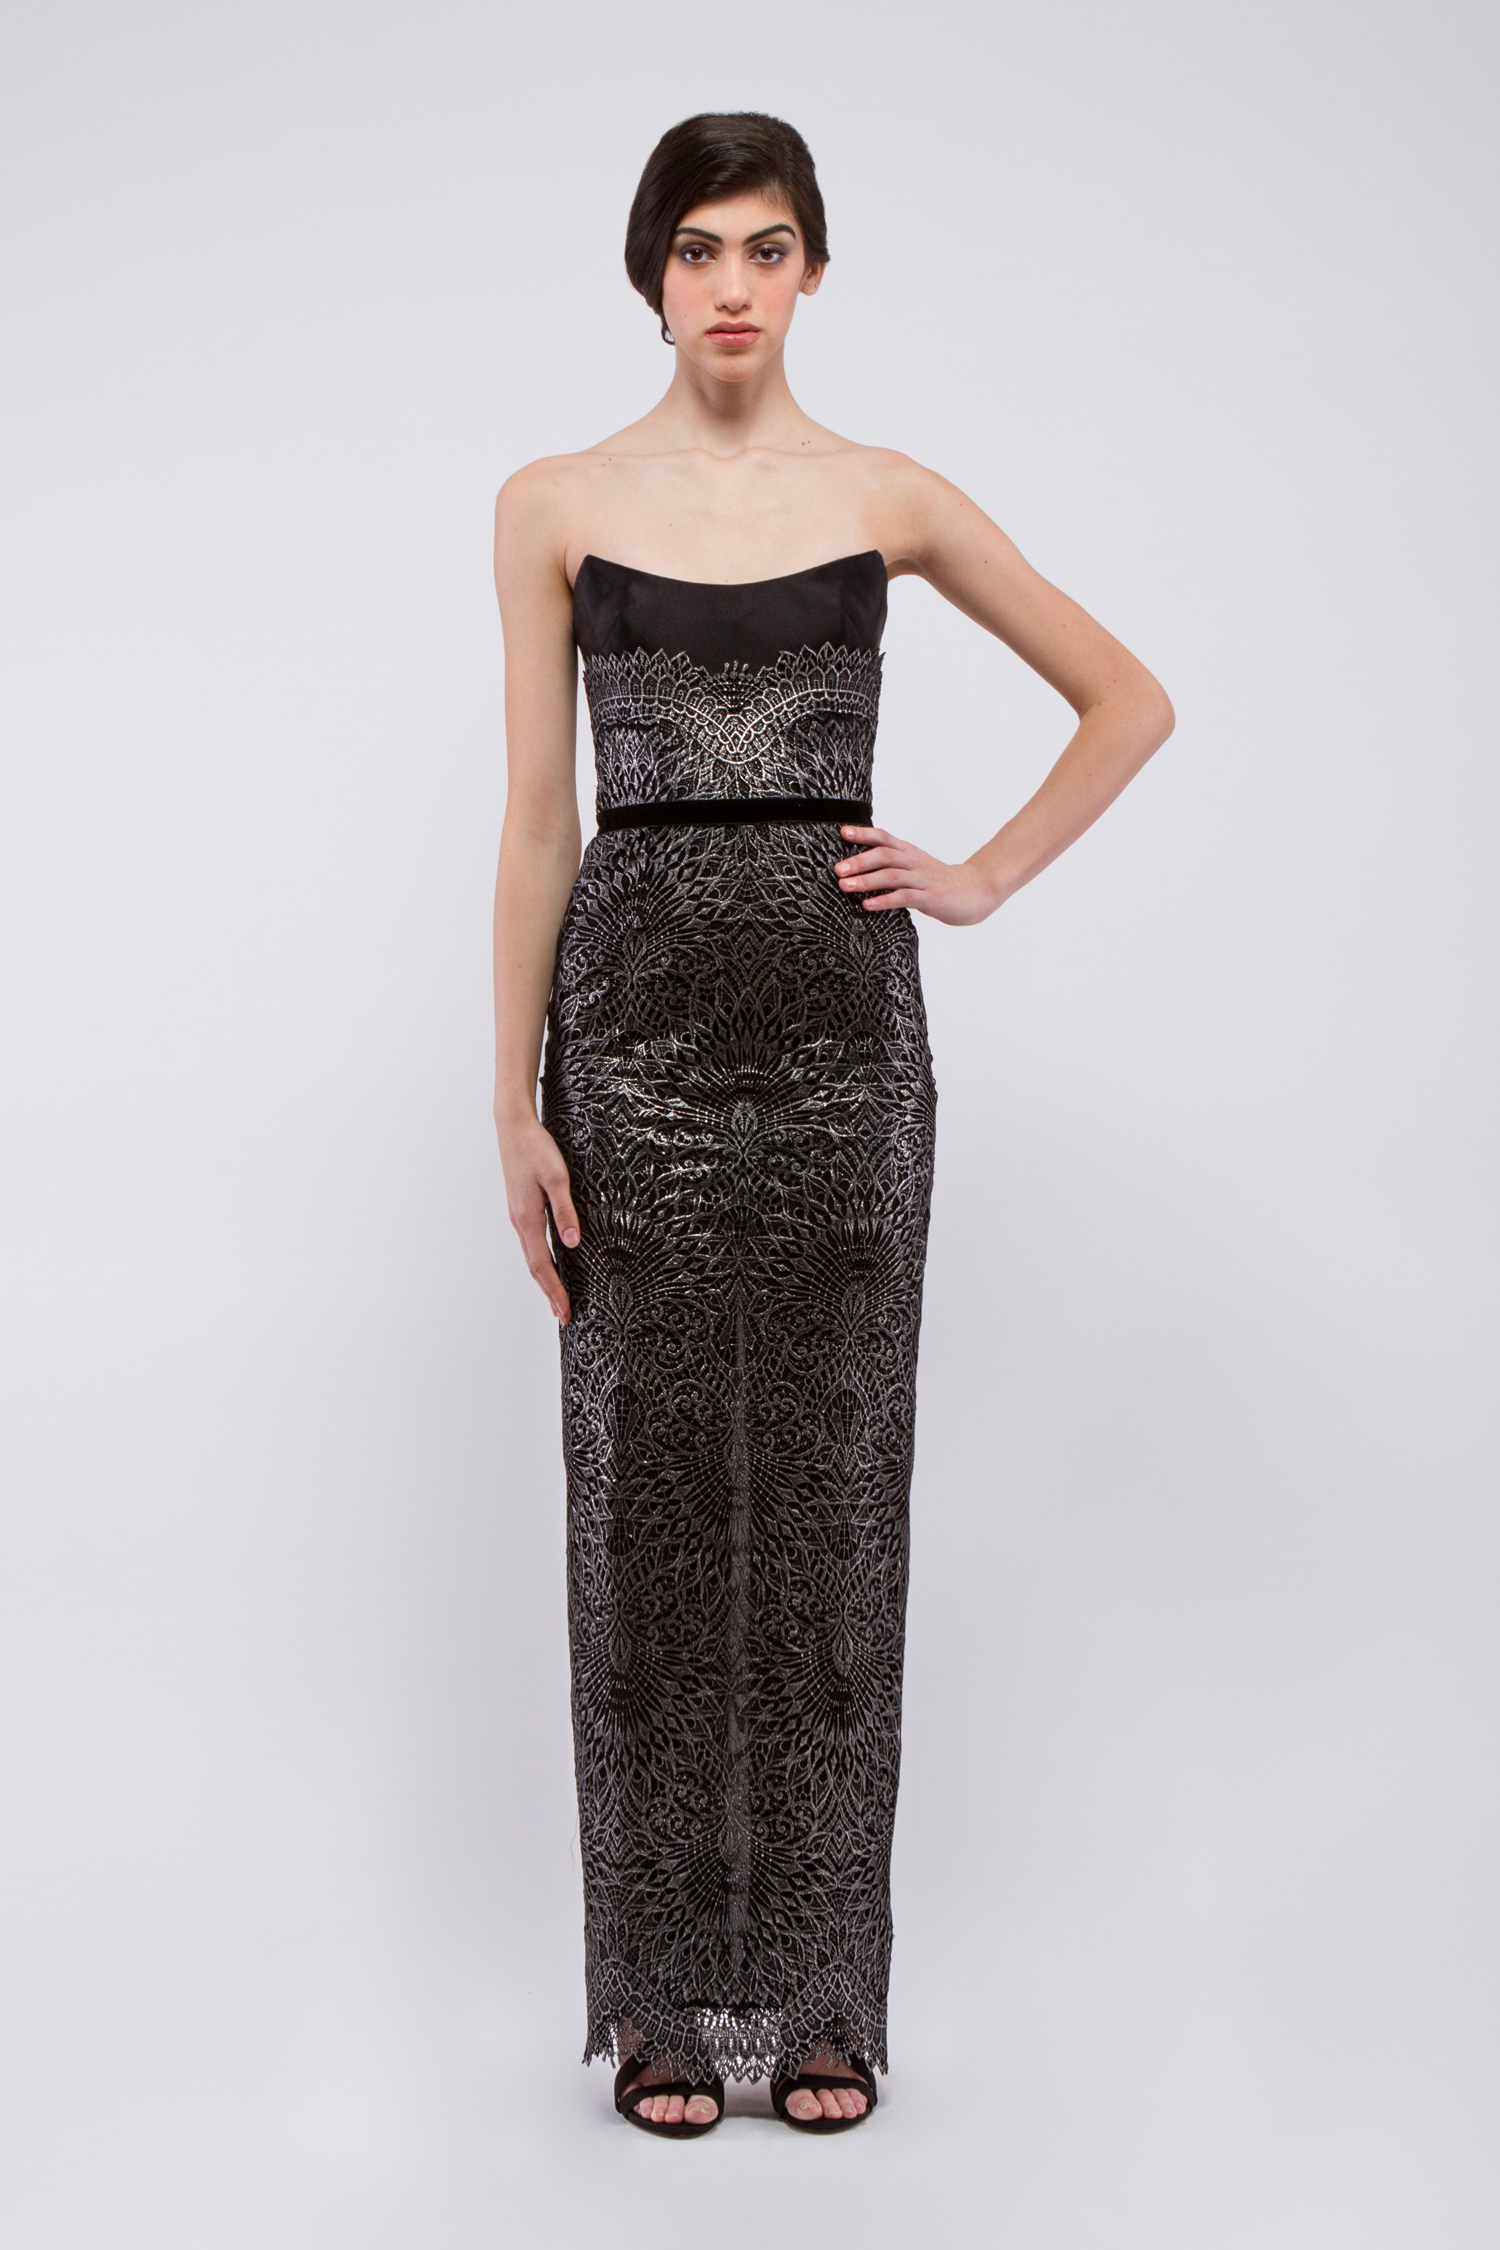 Strapless metallic lace column gown with bustier detailing - Look 8 - The Dream